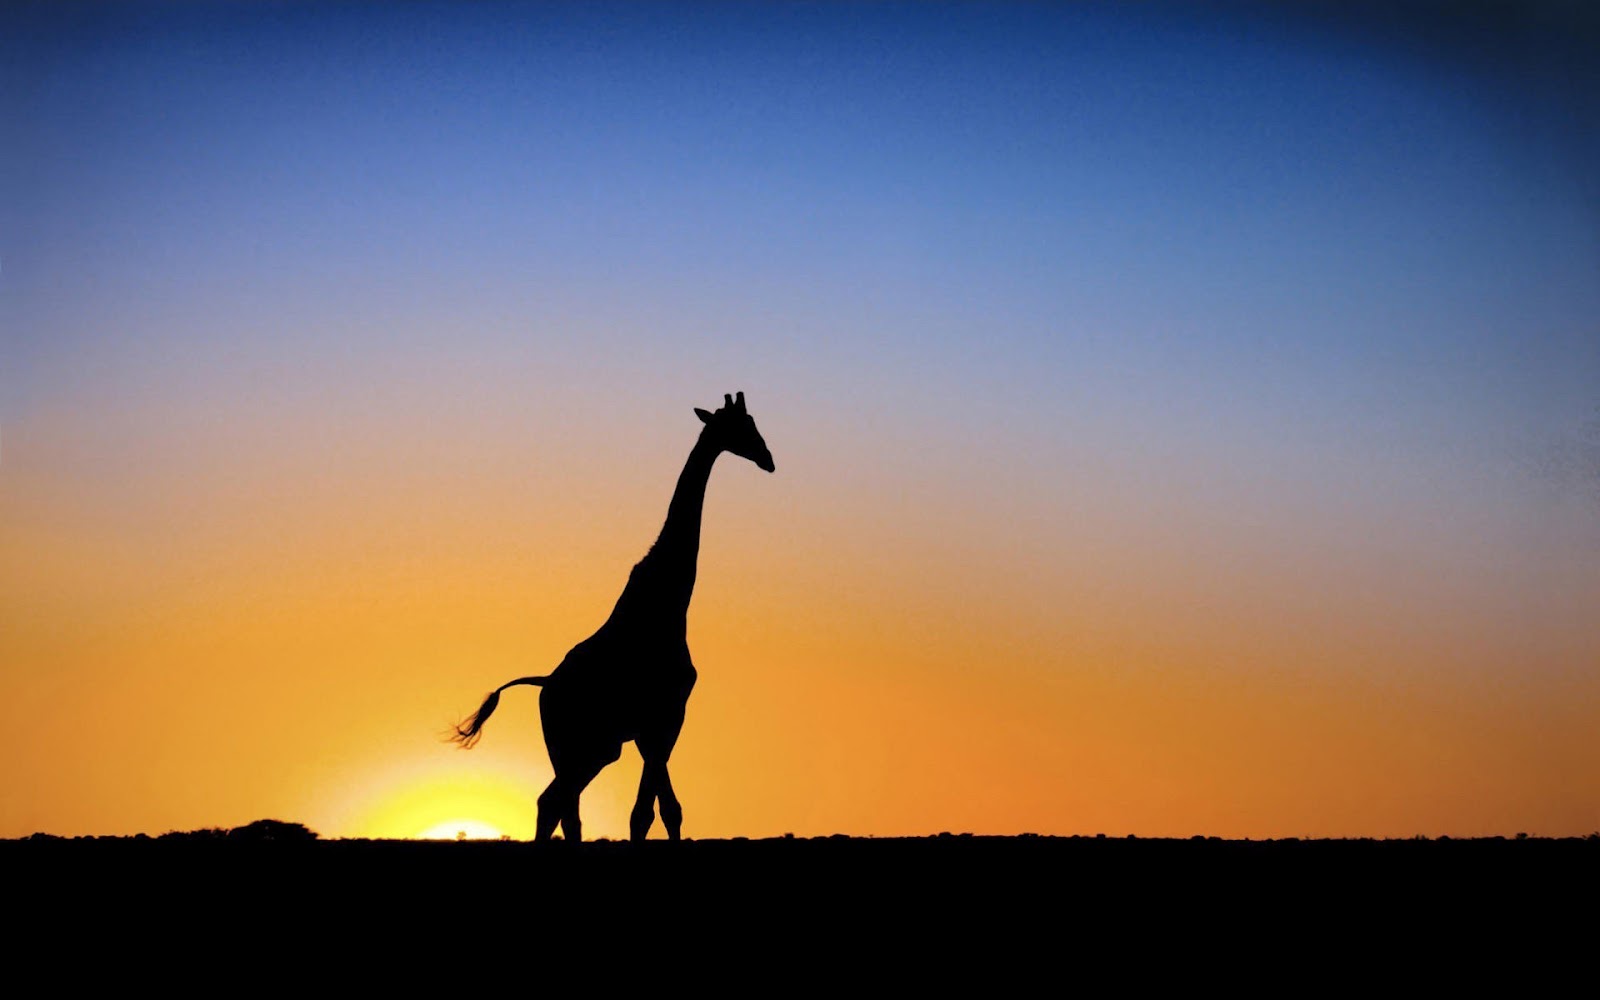 HD Giraffe Wallpaper With A At Sunrise Background Picture Jpg